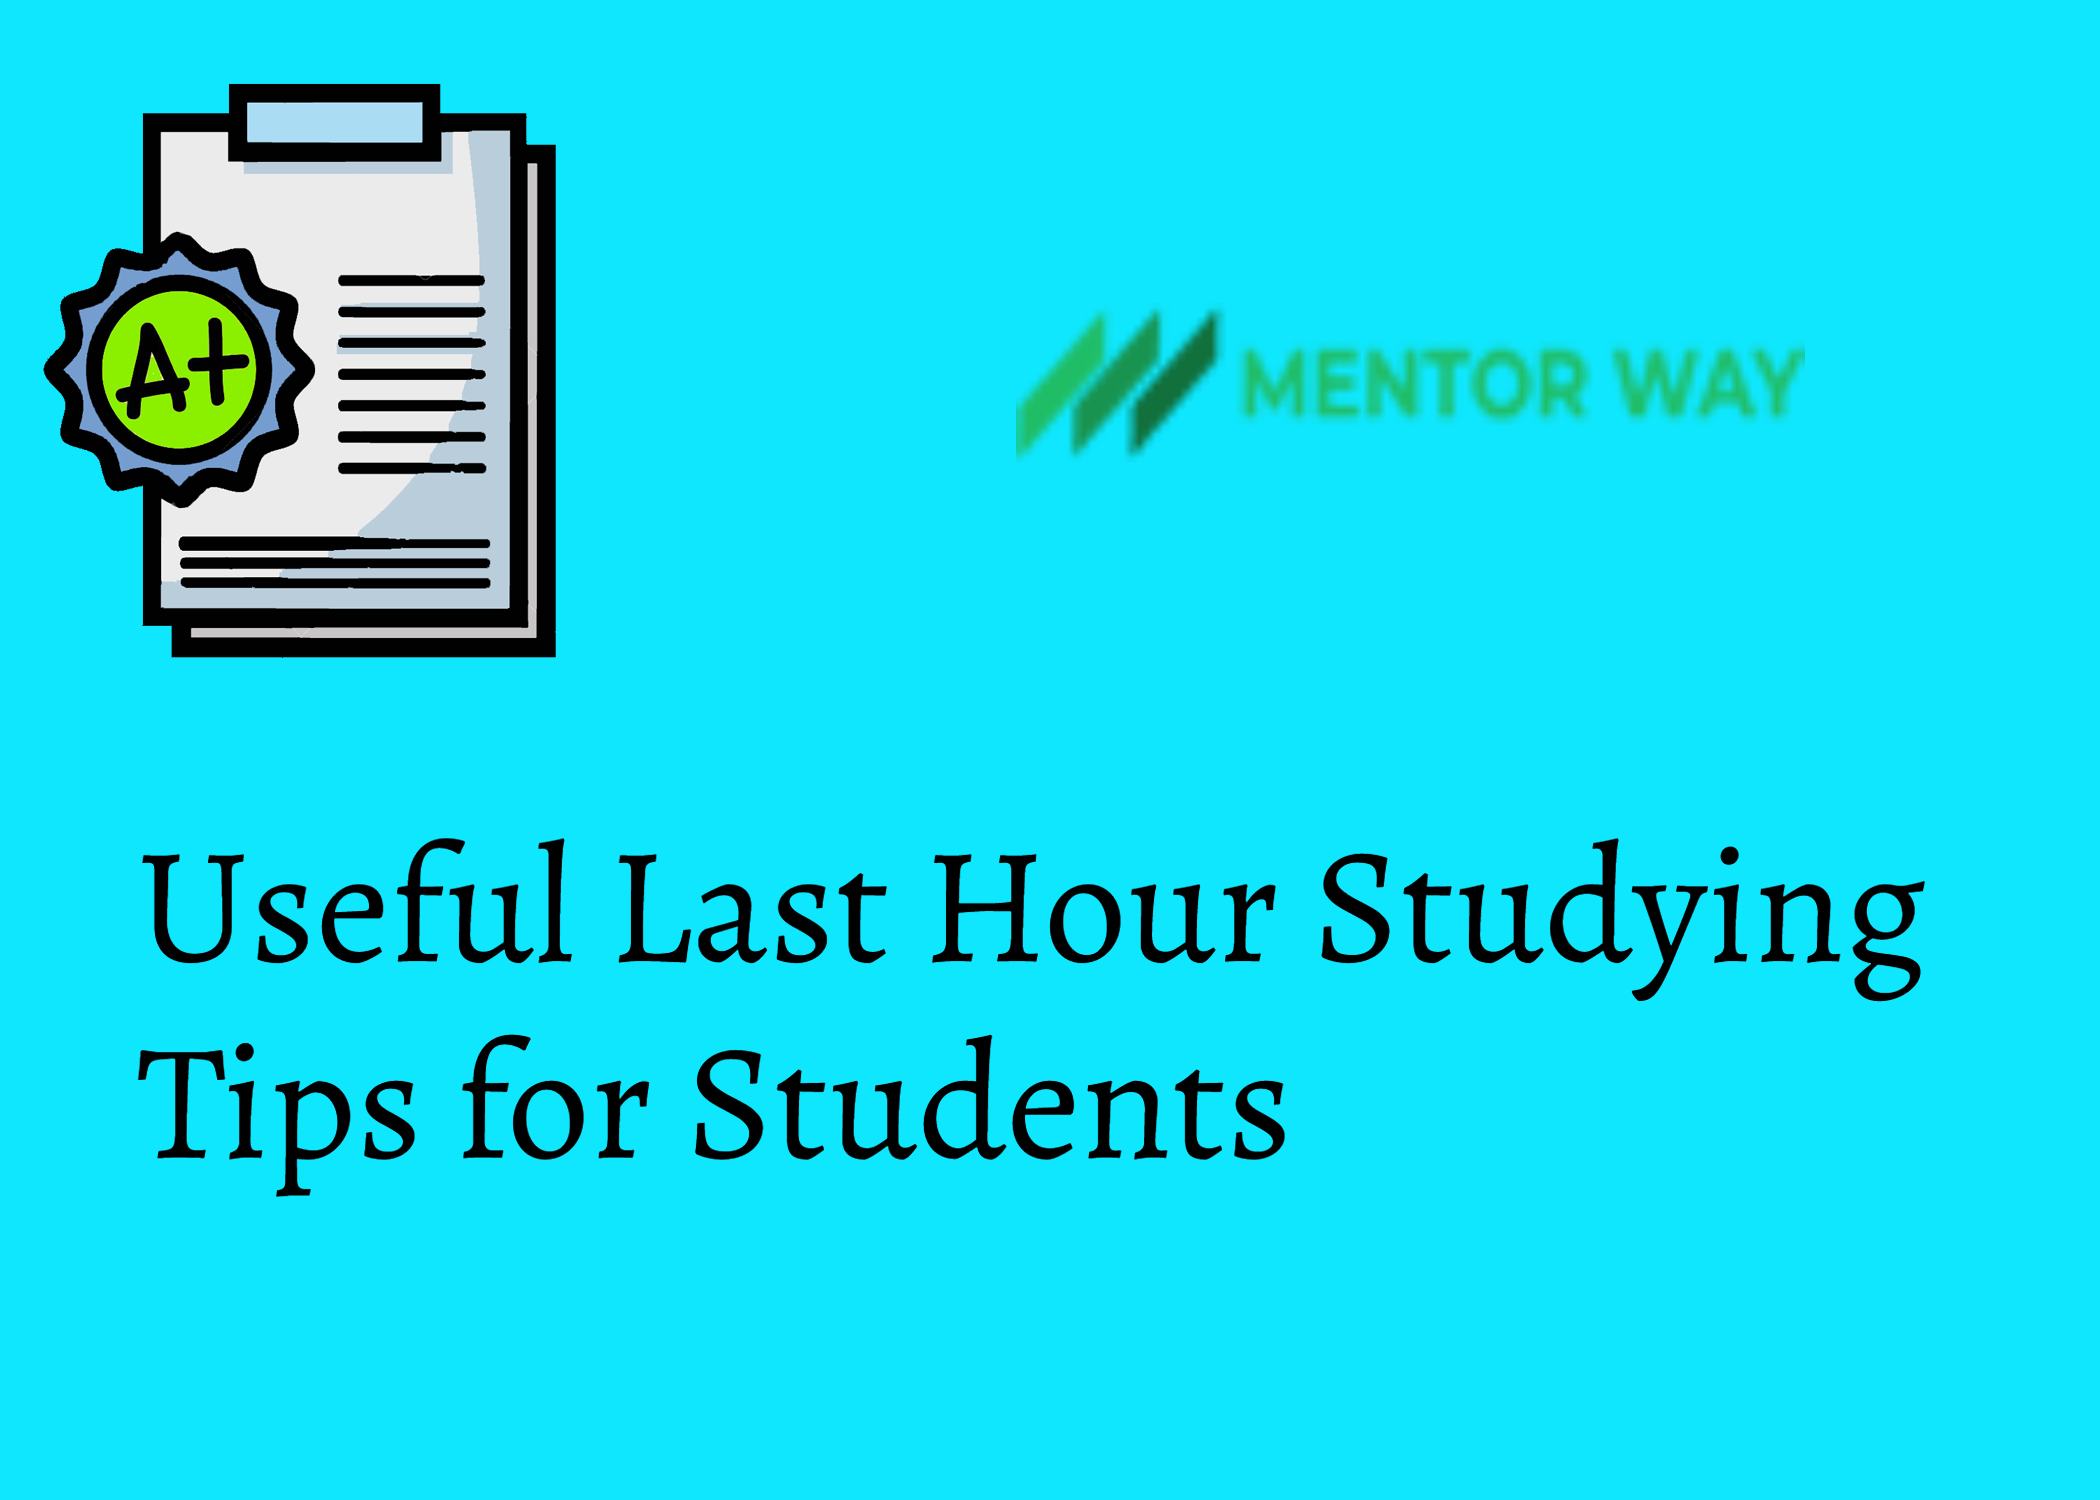 Useful Last Hour Studying Tips for Students